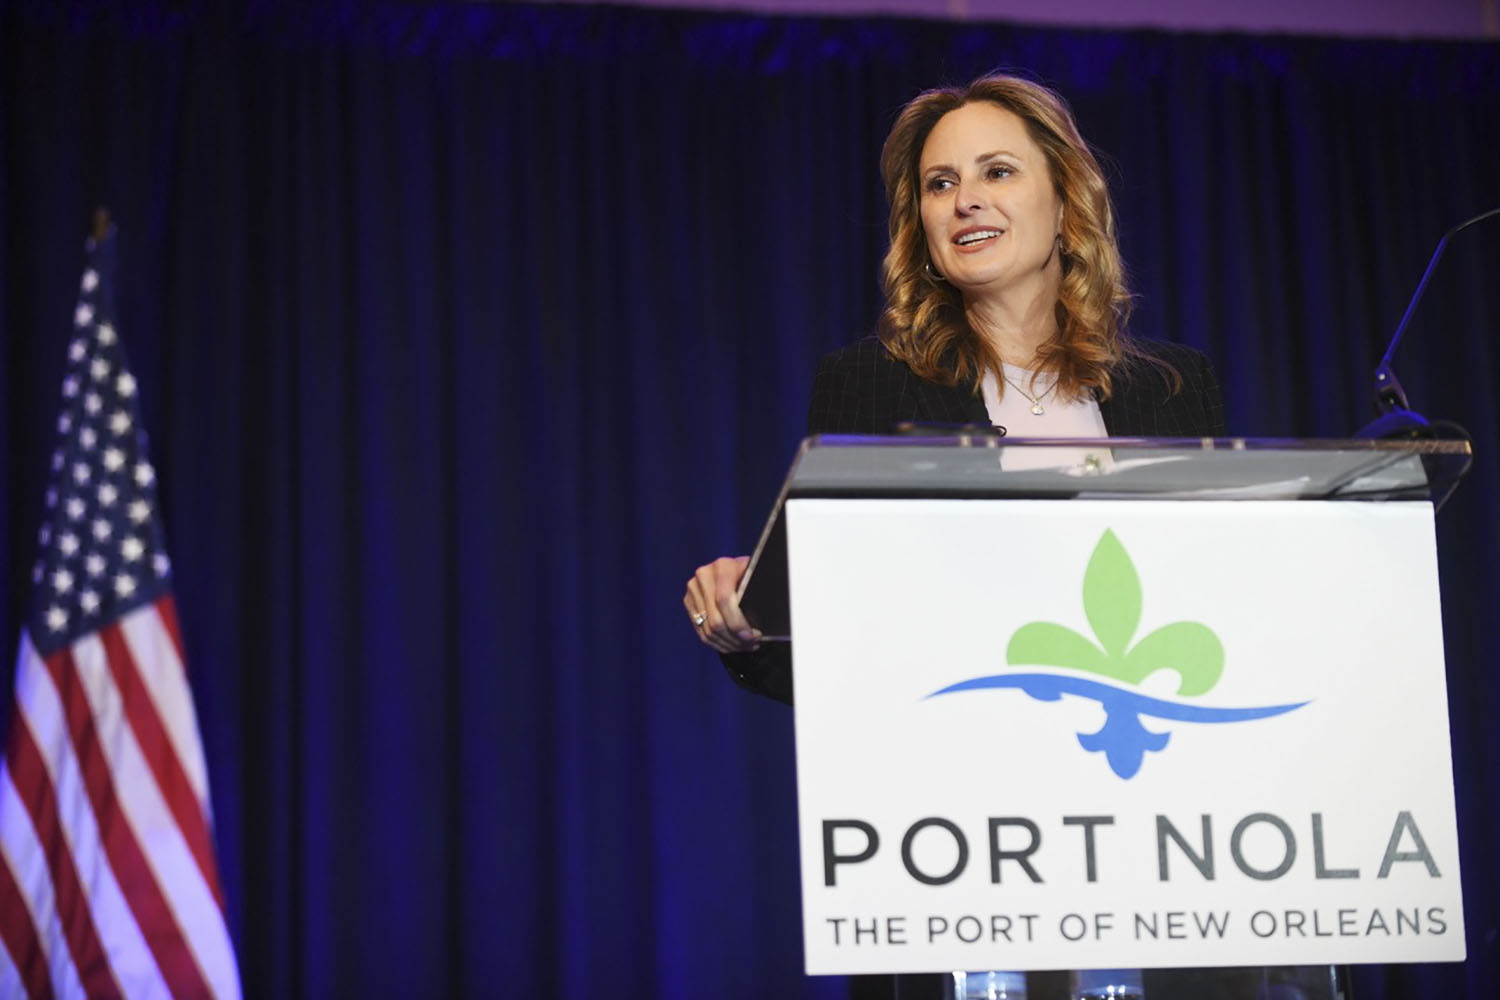 Port NOLA Hosts First ‘State Of The Port’ Gathering Since 2019